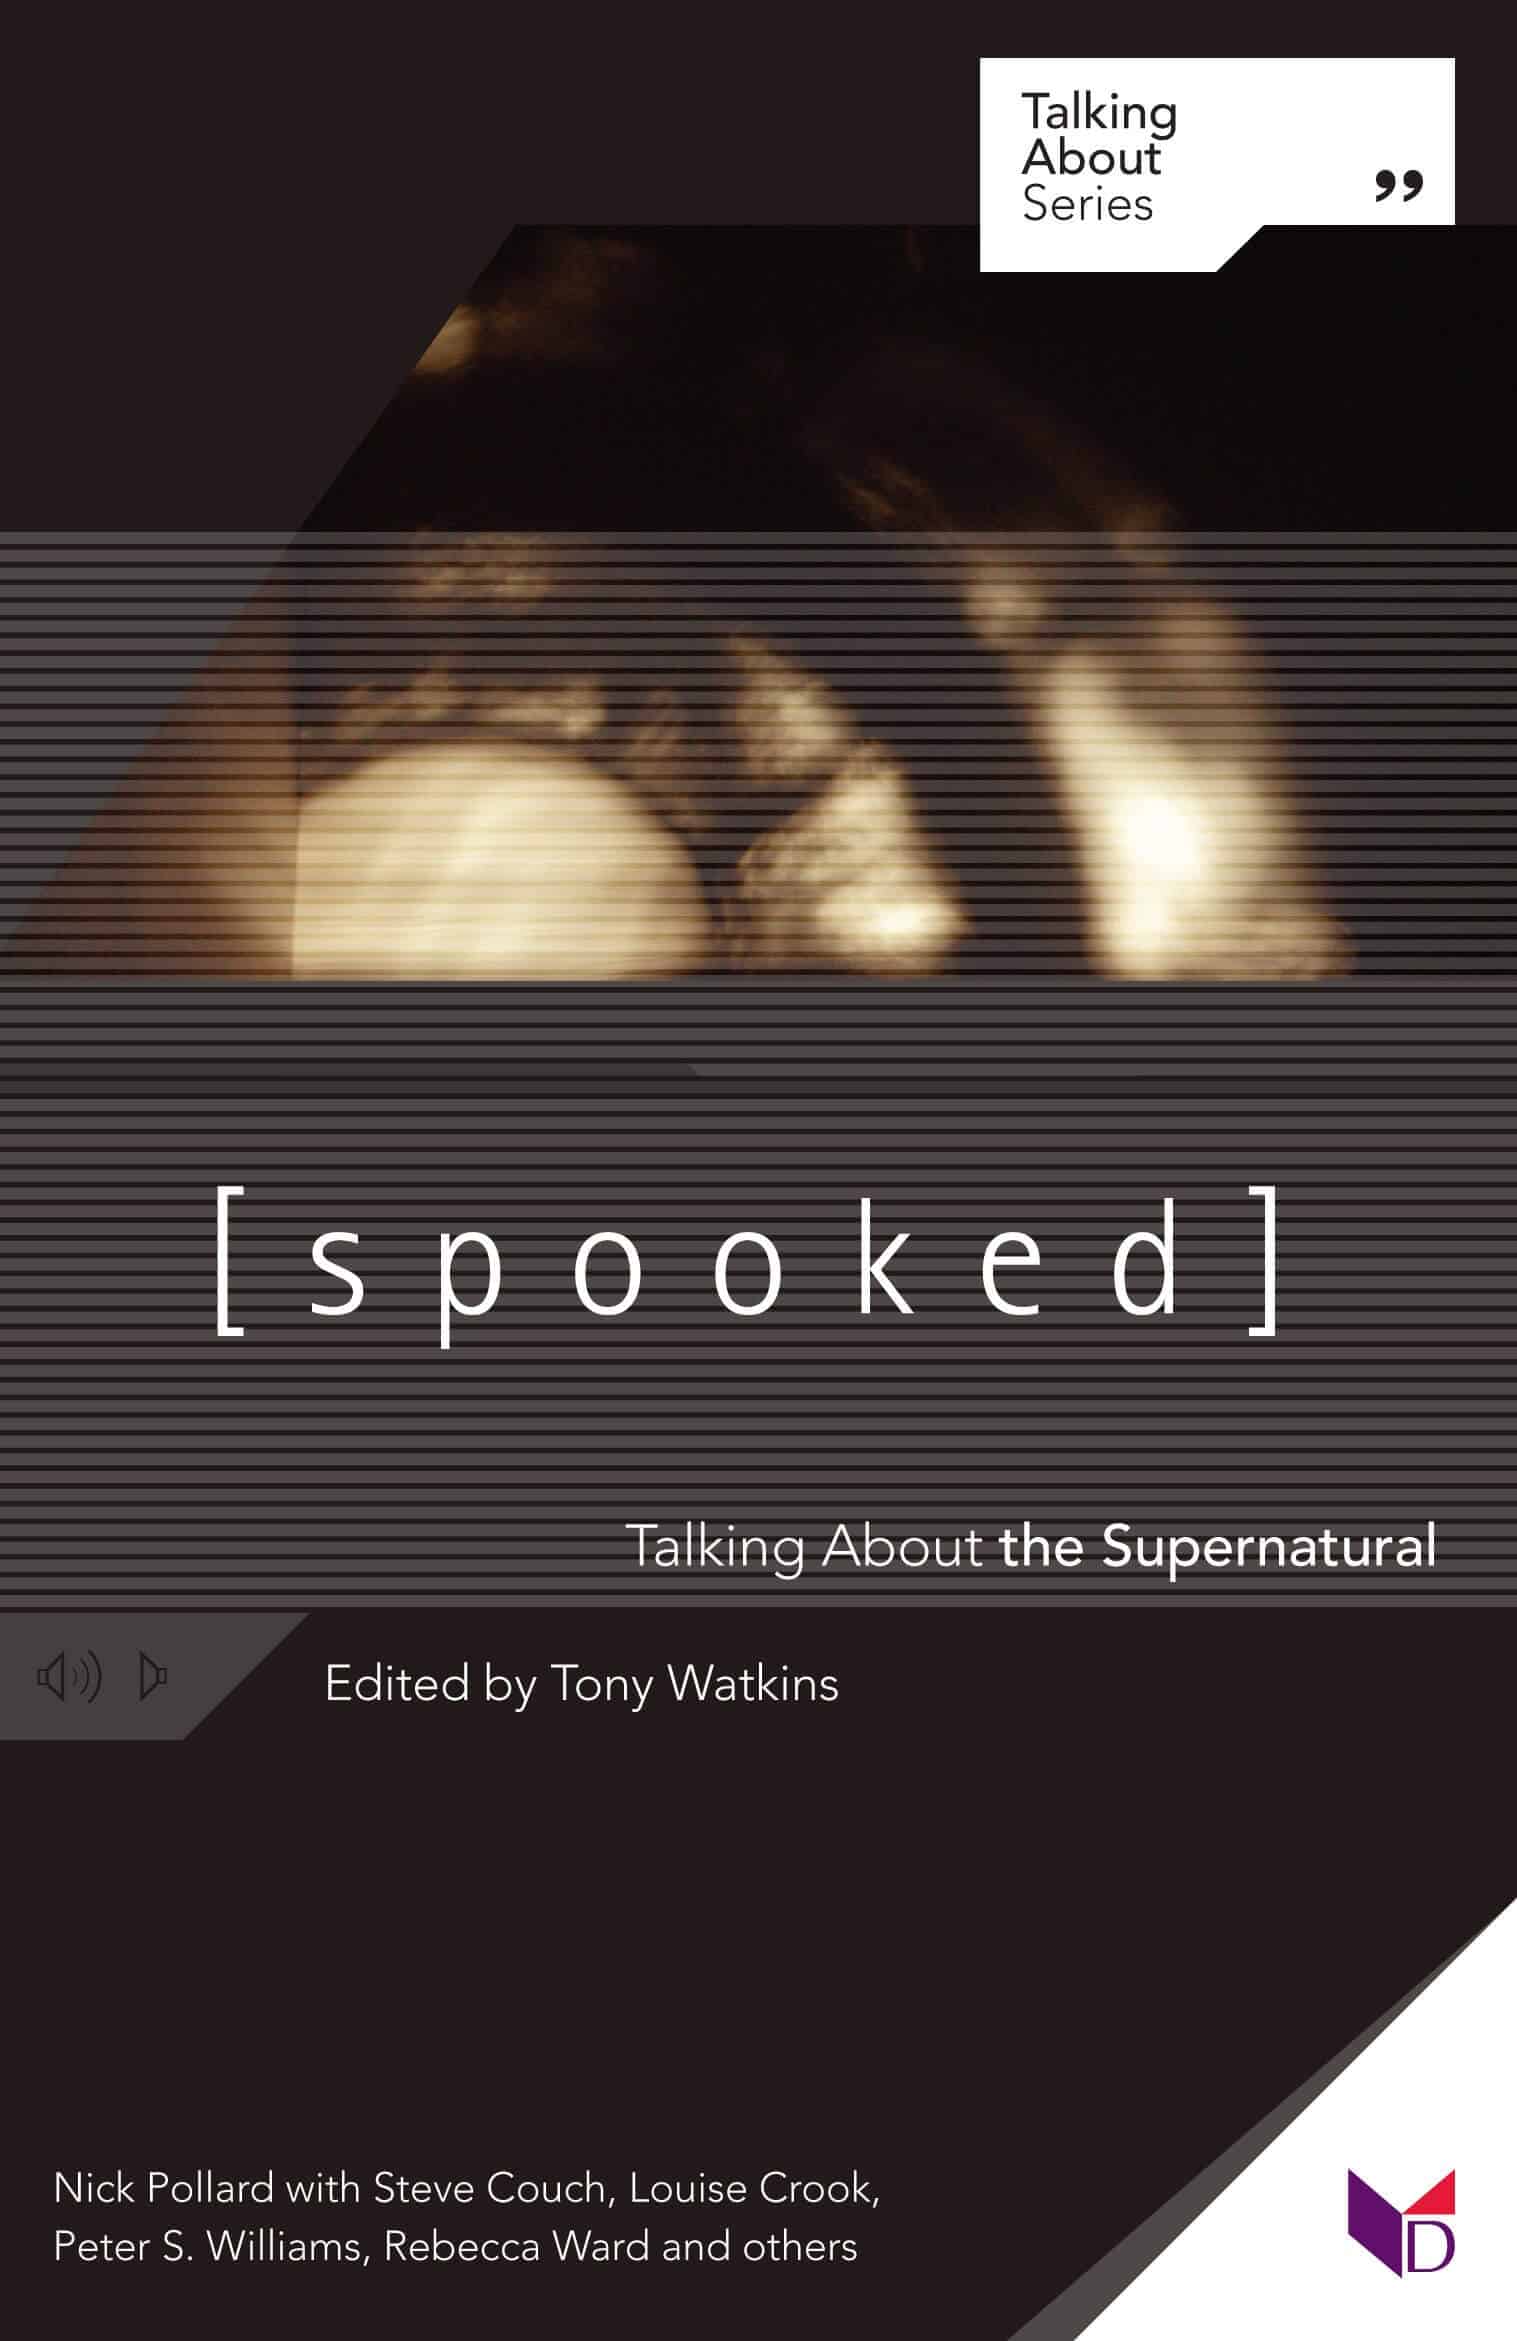 Spooked: Talking About the Supernatural (Damaris Books, 2006)